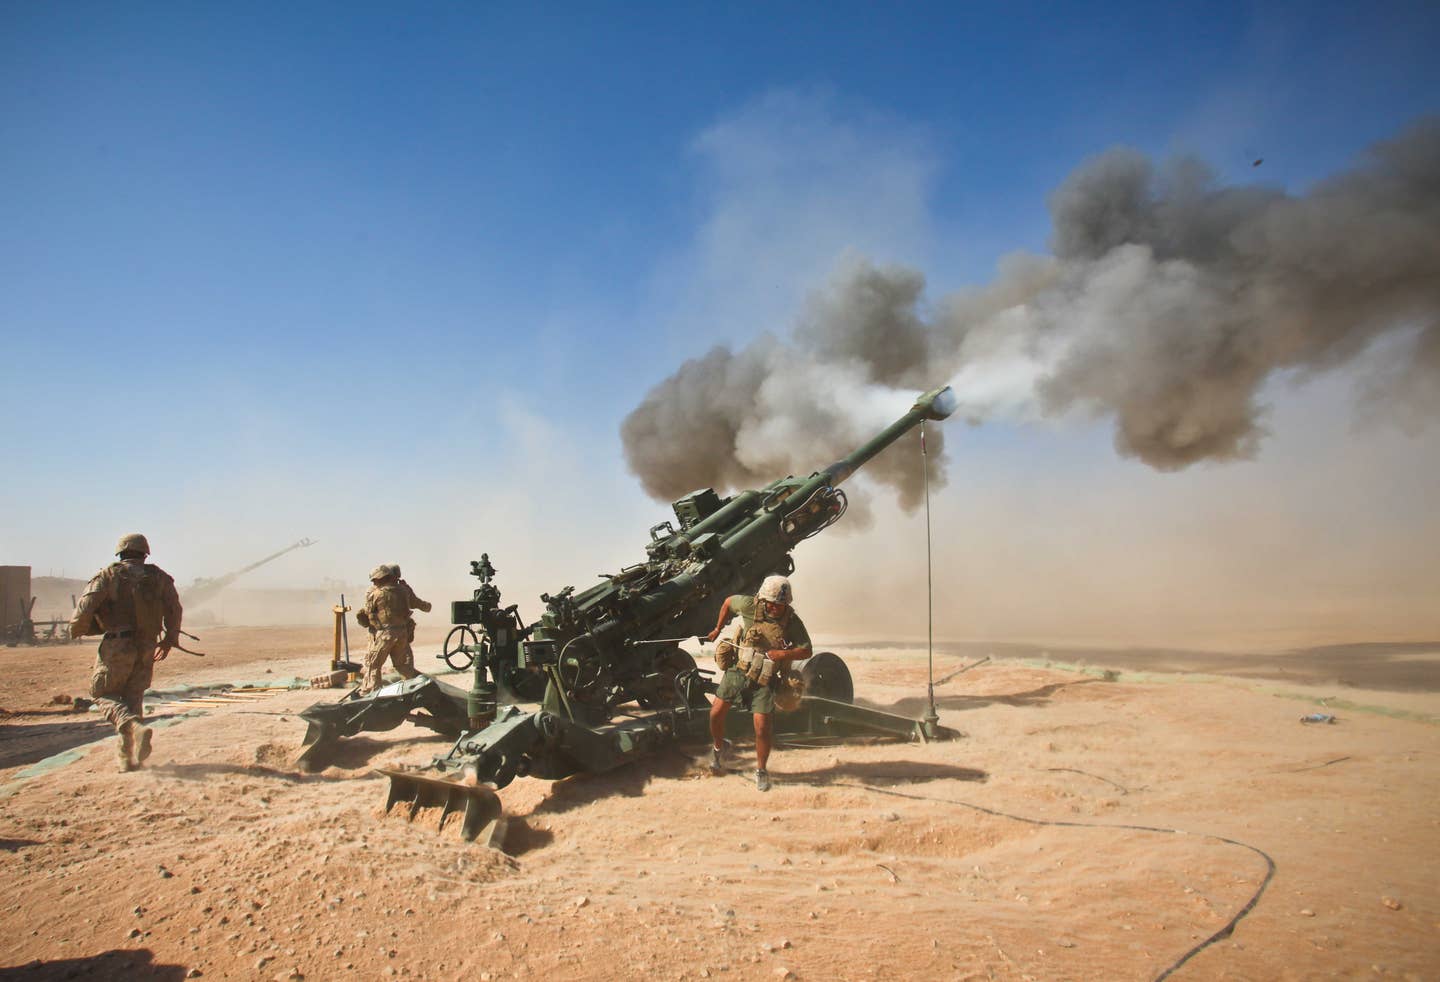 Marines with Charlie Battery, 1st Battalion, 12th Marine Regiment, fire an M982 Excalibur round from an M777 howitzer during a recent fire support mission. (US Marine Corps photo)